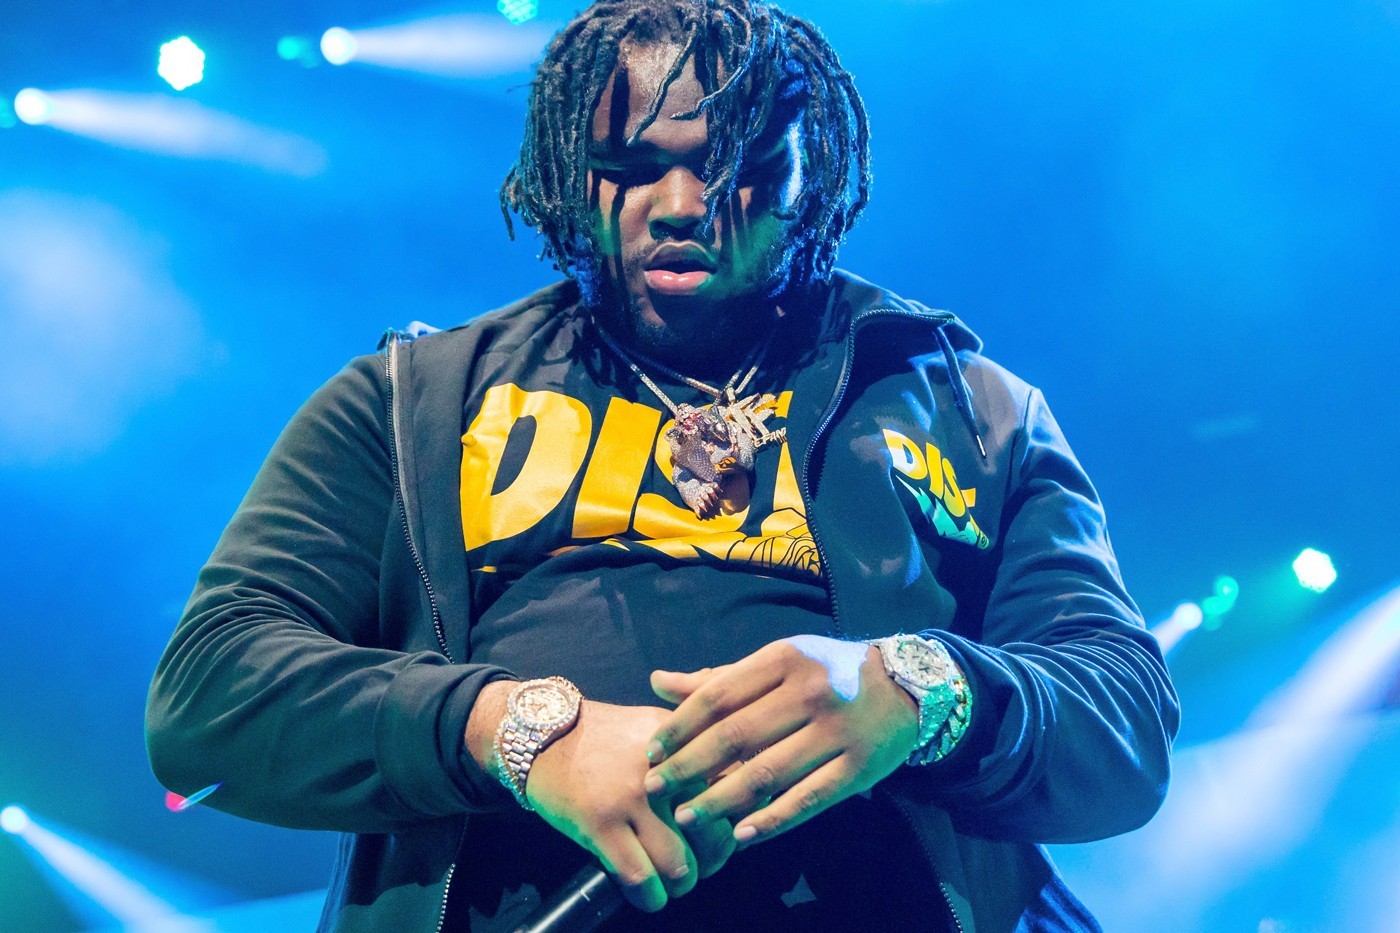 Tee Grizzley's Car Gets Shot Up, Aunt/Manager Dies in the Shooting